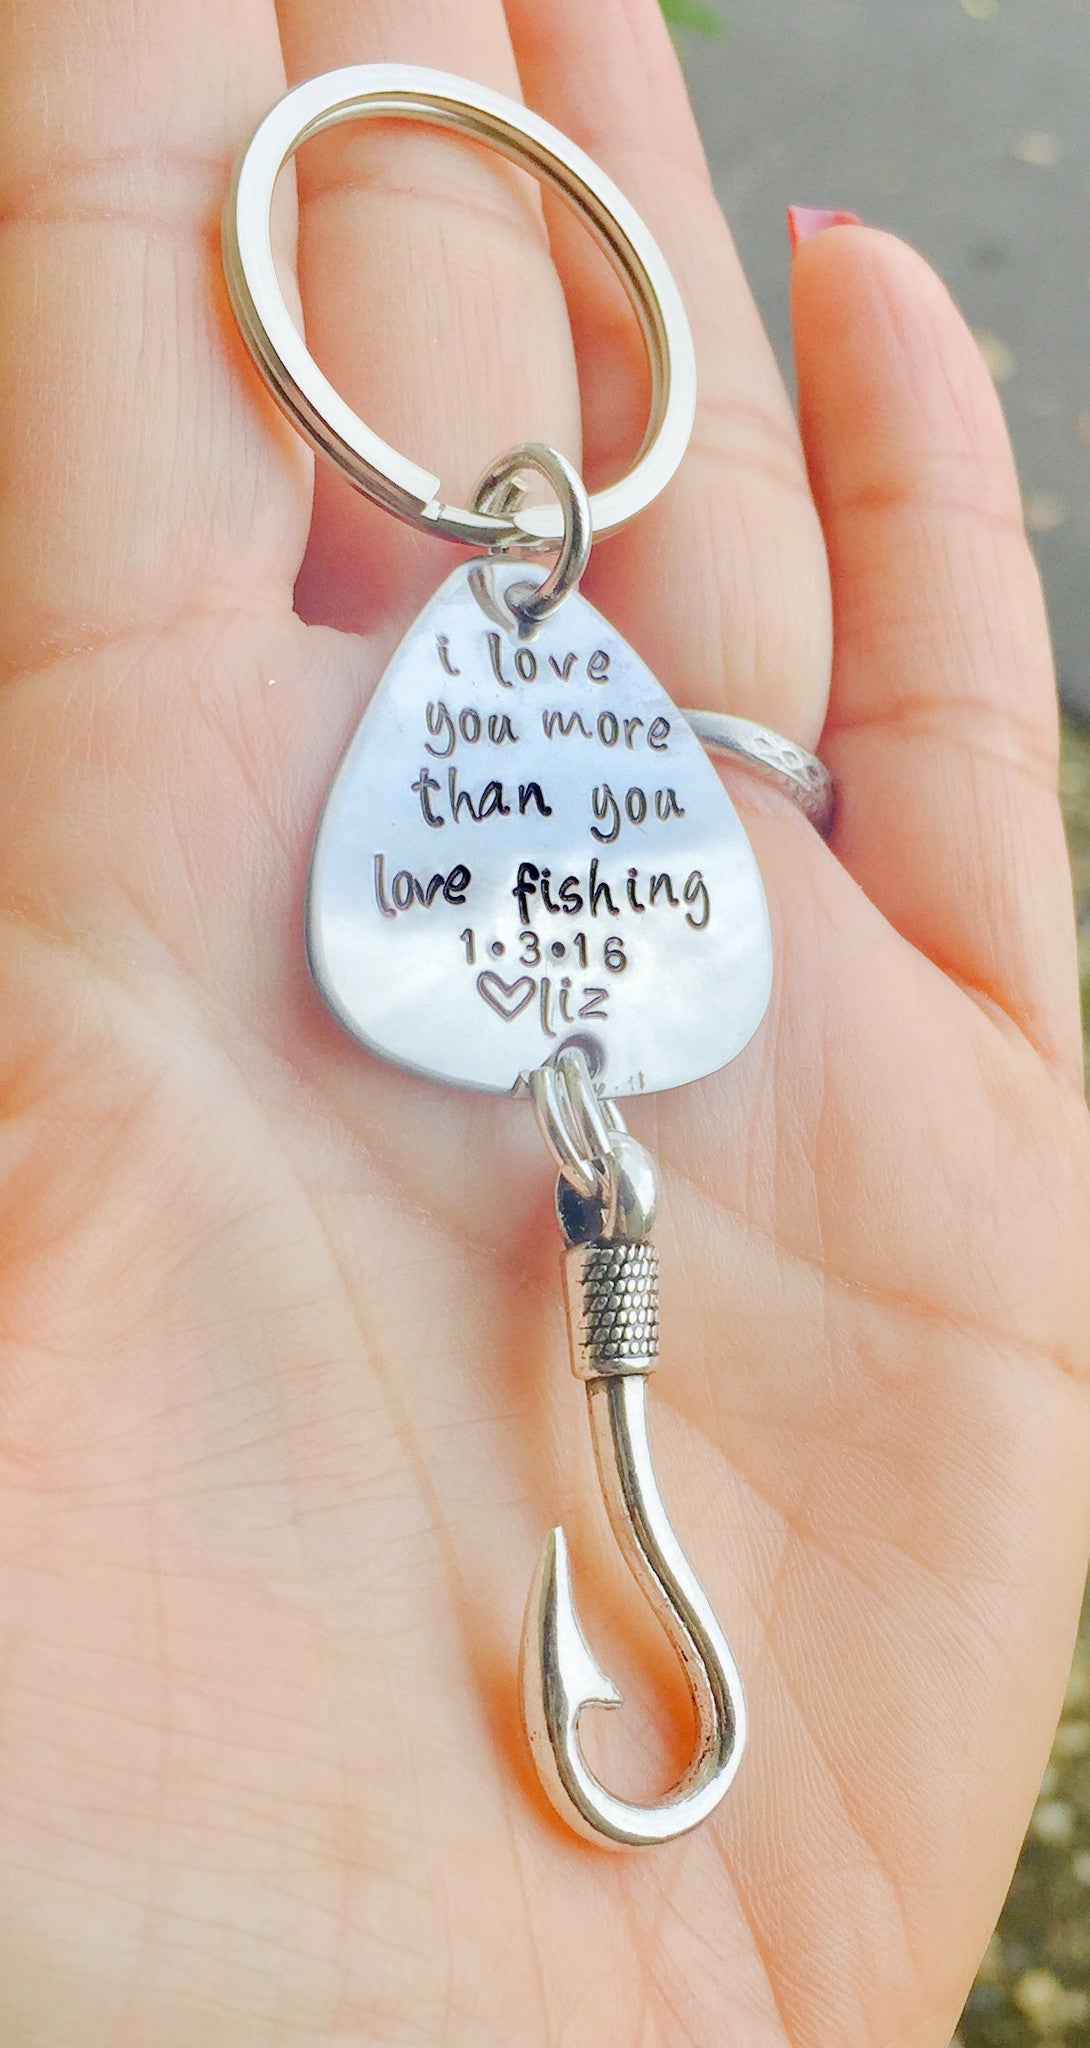 love you more than you love fishing keychain - Natashaaloha, jewelry, bracelets, necklace, keychains, fishing lures, gifts for men, charms, personalized, 